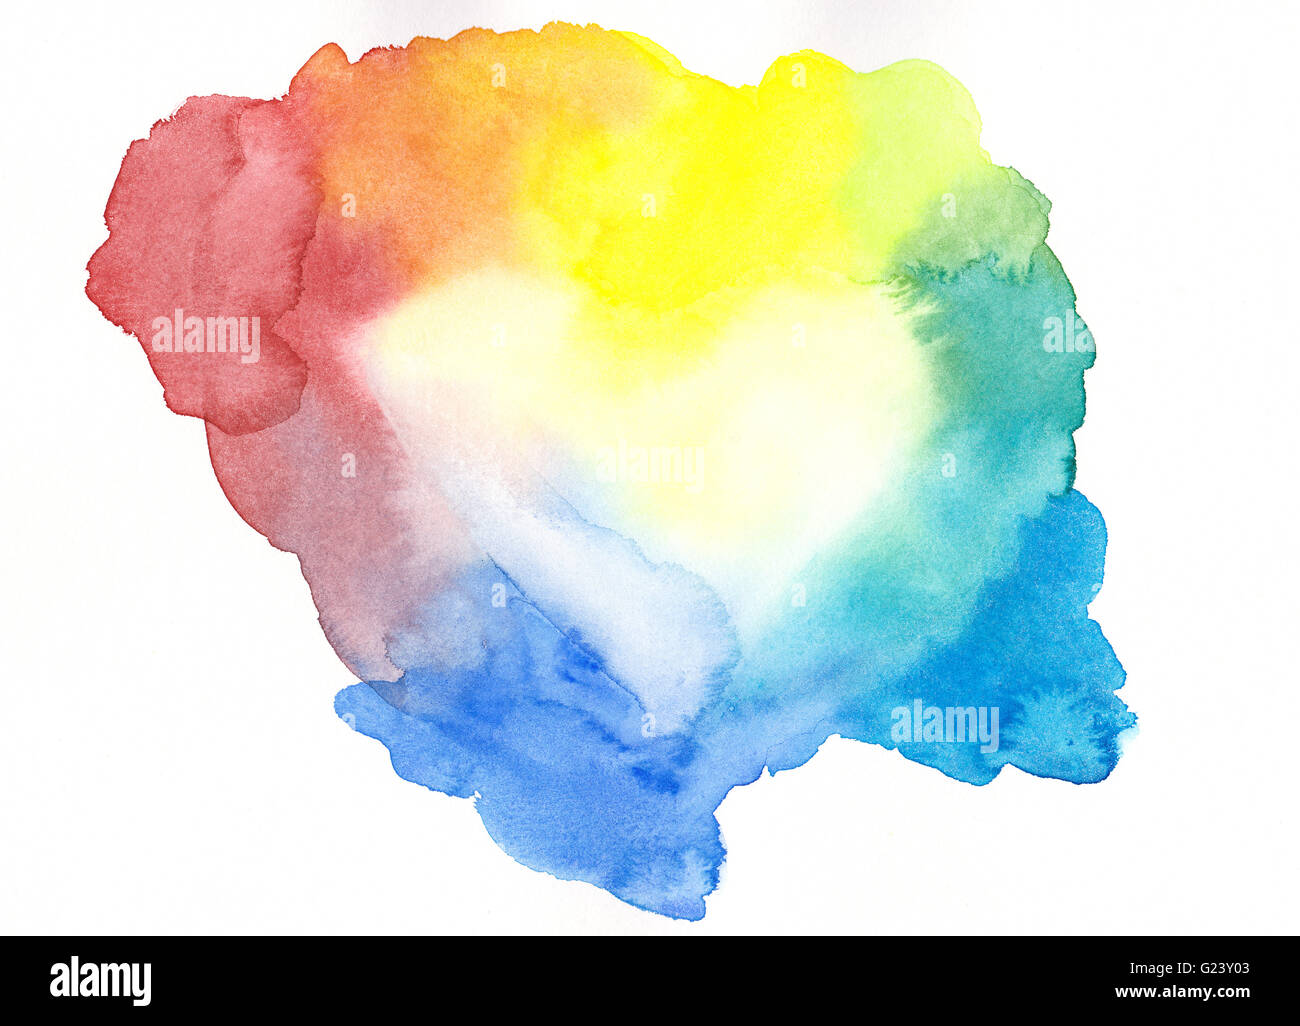 Rainbow colored framed heart watercolor painting Stock Photo